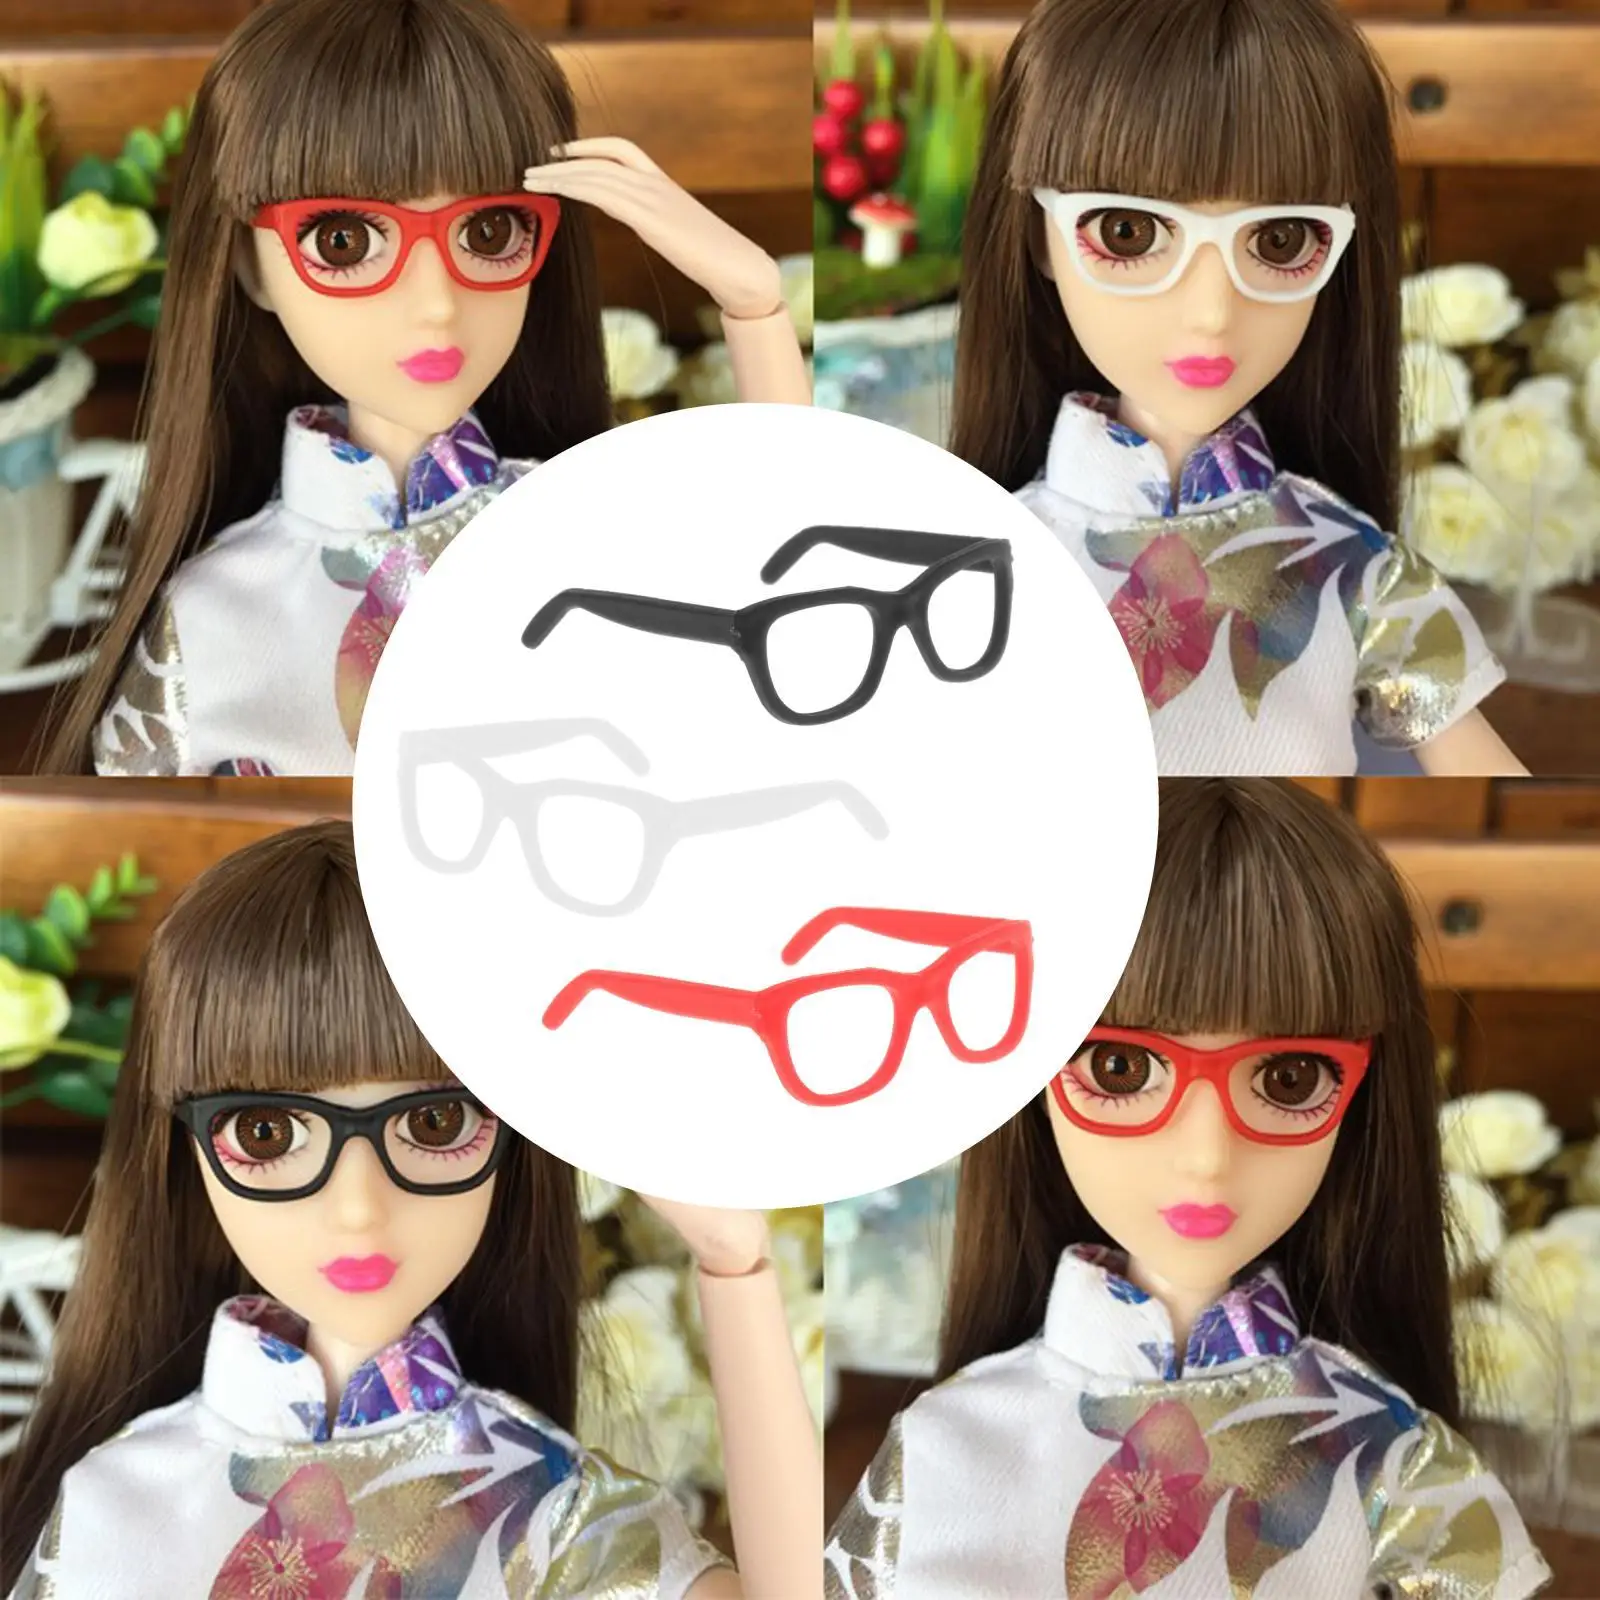 Legendog 1 Pair Doll Glasses Toy Accessories Doll Sunglasses Novelty  Pretend Toy Doll Eyeglasses for Kids : Amazon.in: Toys & Games